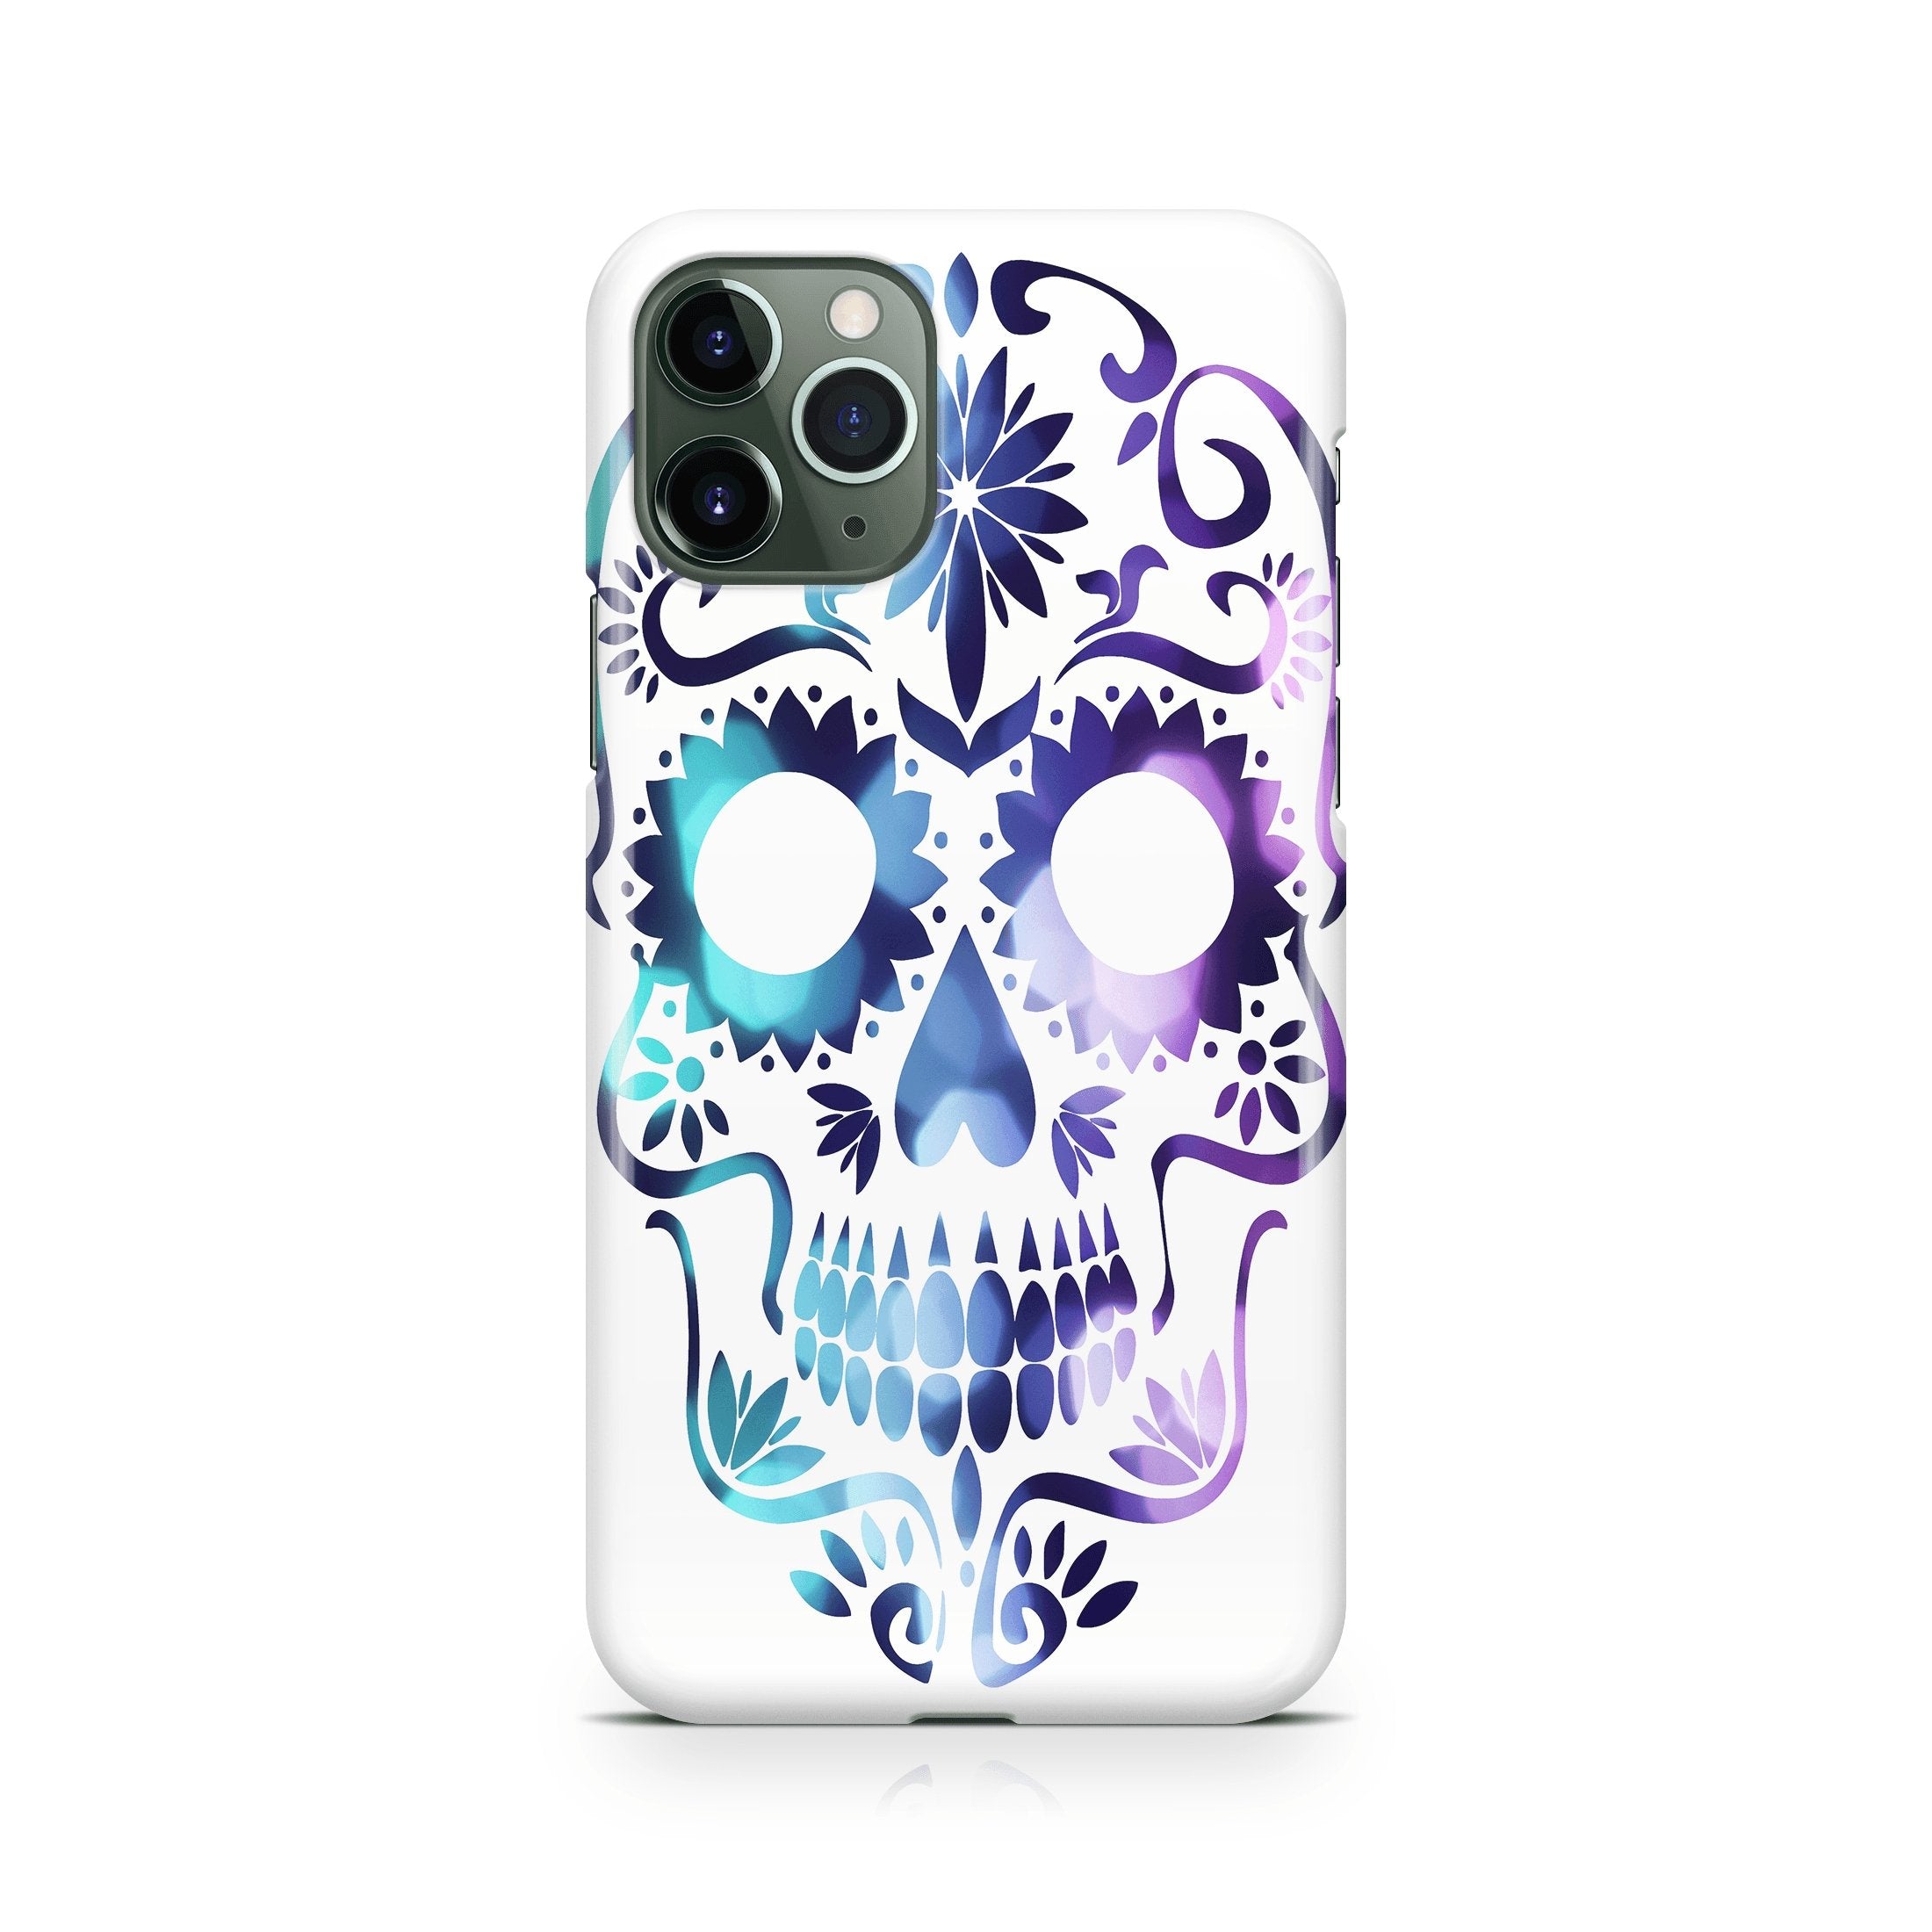 Vertex Mind - iPhone phone case designs by CaseSwagger